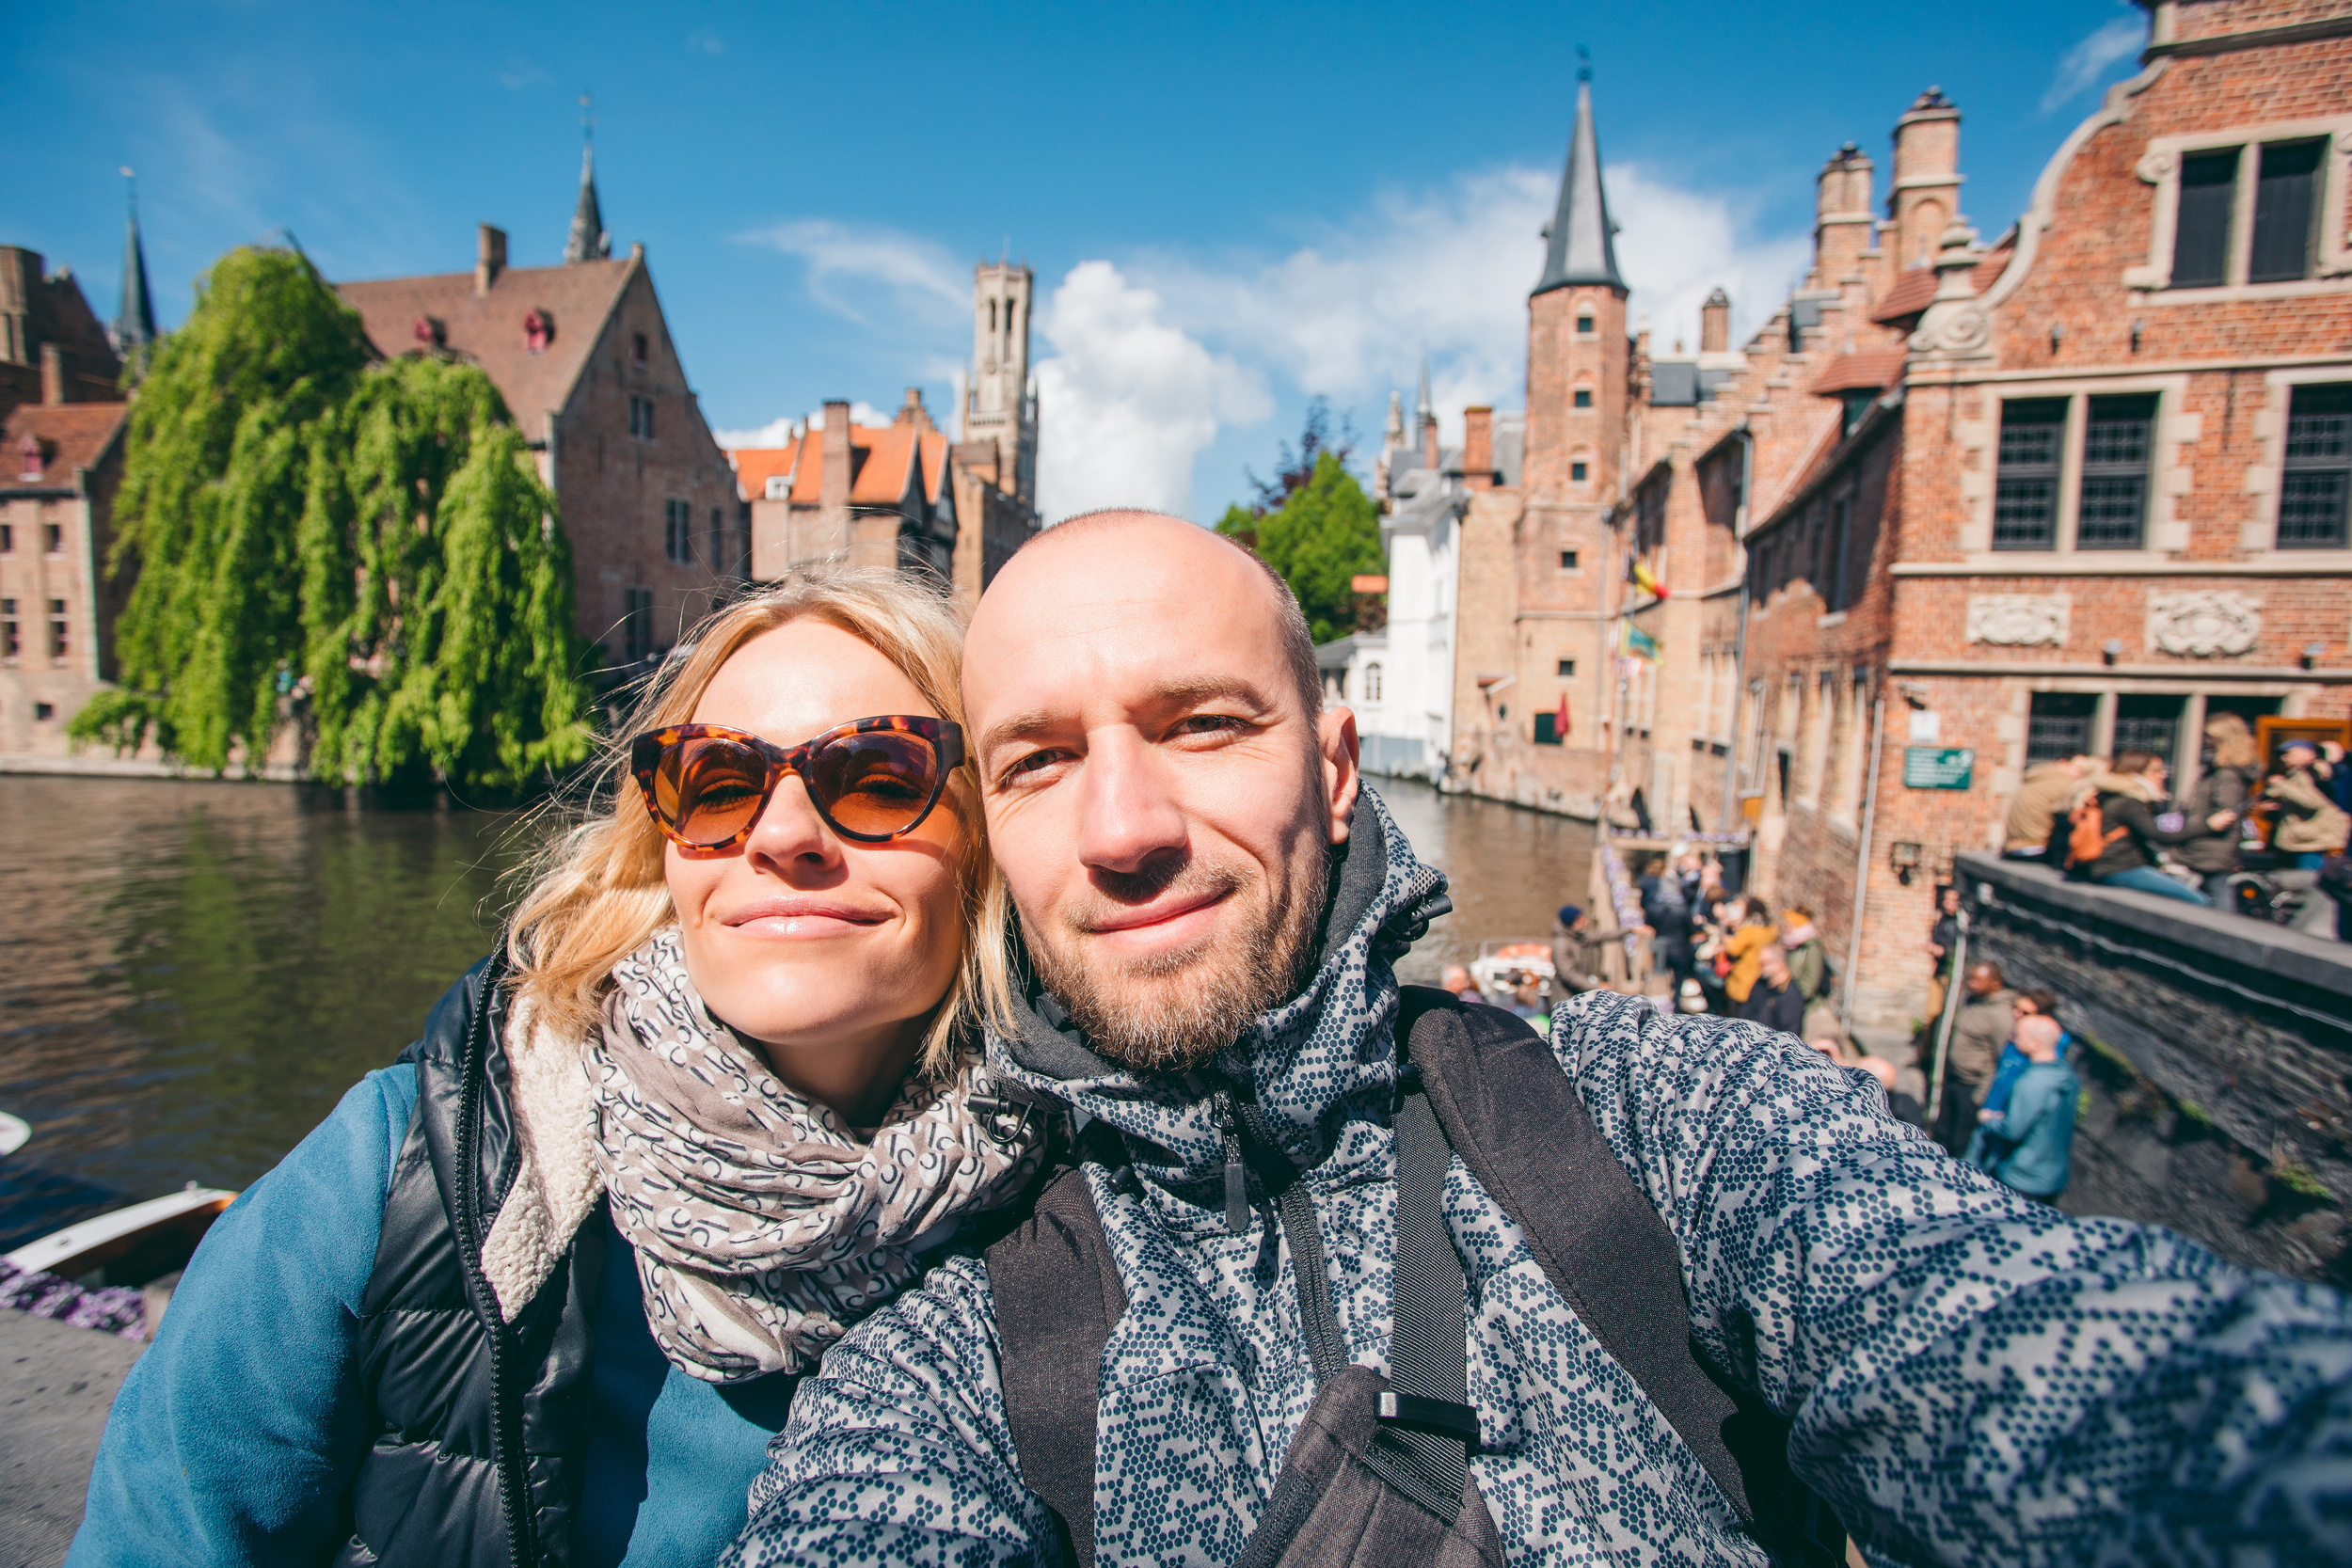 <p>This small village in western Belgium is the stuff of fairytales. The well-preserved Medieval architecture makes for a very romantic setting. And there are plenty of local chocolate shops, breweries, and bakeries to keep you and your partner busy for a few days.</p><p>You may also like: <a href='https://www.yardbarker.com/lifestyle/articles/22_of_the_warmest_destinations_around_the_world_in_winter_for_your_escape_012224/s1__39674589'>22 of the warmest destinations around the world in winter for your escape</a></p>